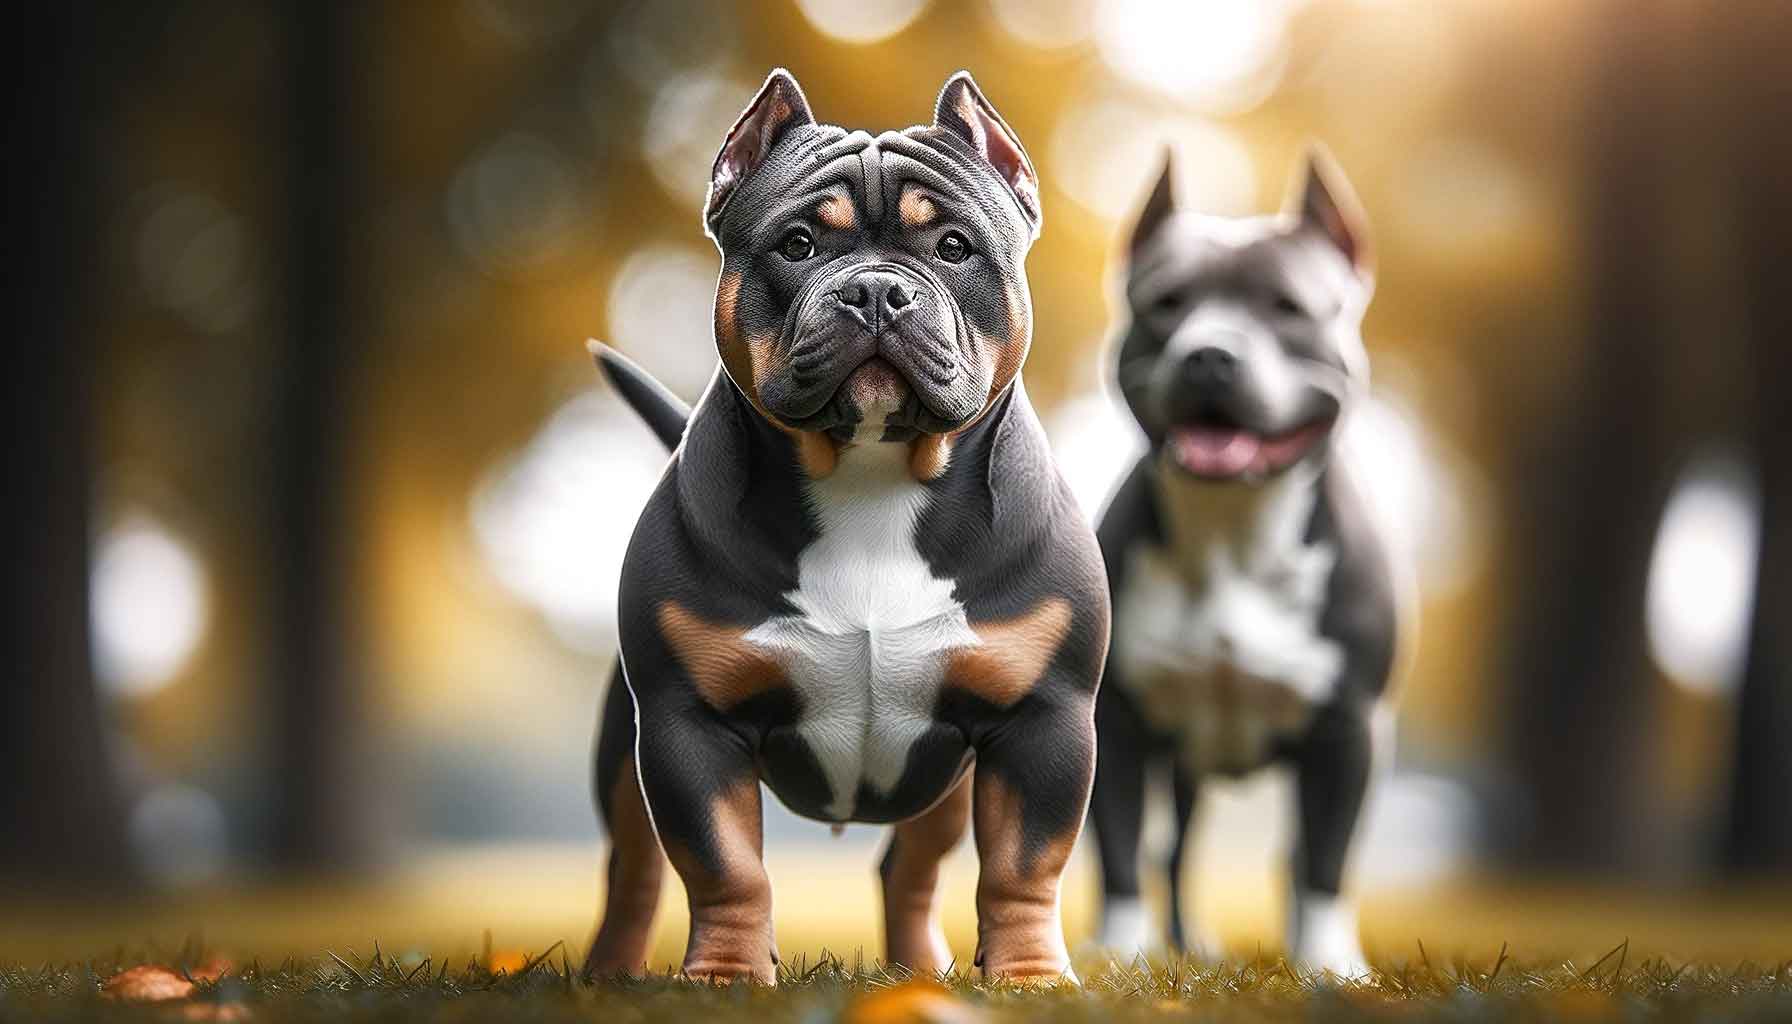 A photograph of a Micro Bully vs Pitbull side by side in a park. The Micro Bully, compact and muscular, stands in the foreground, while the taller and athletic Pitbull Terrier is in the soft-focus background, illustrating their size contrast and build differences.